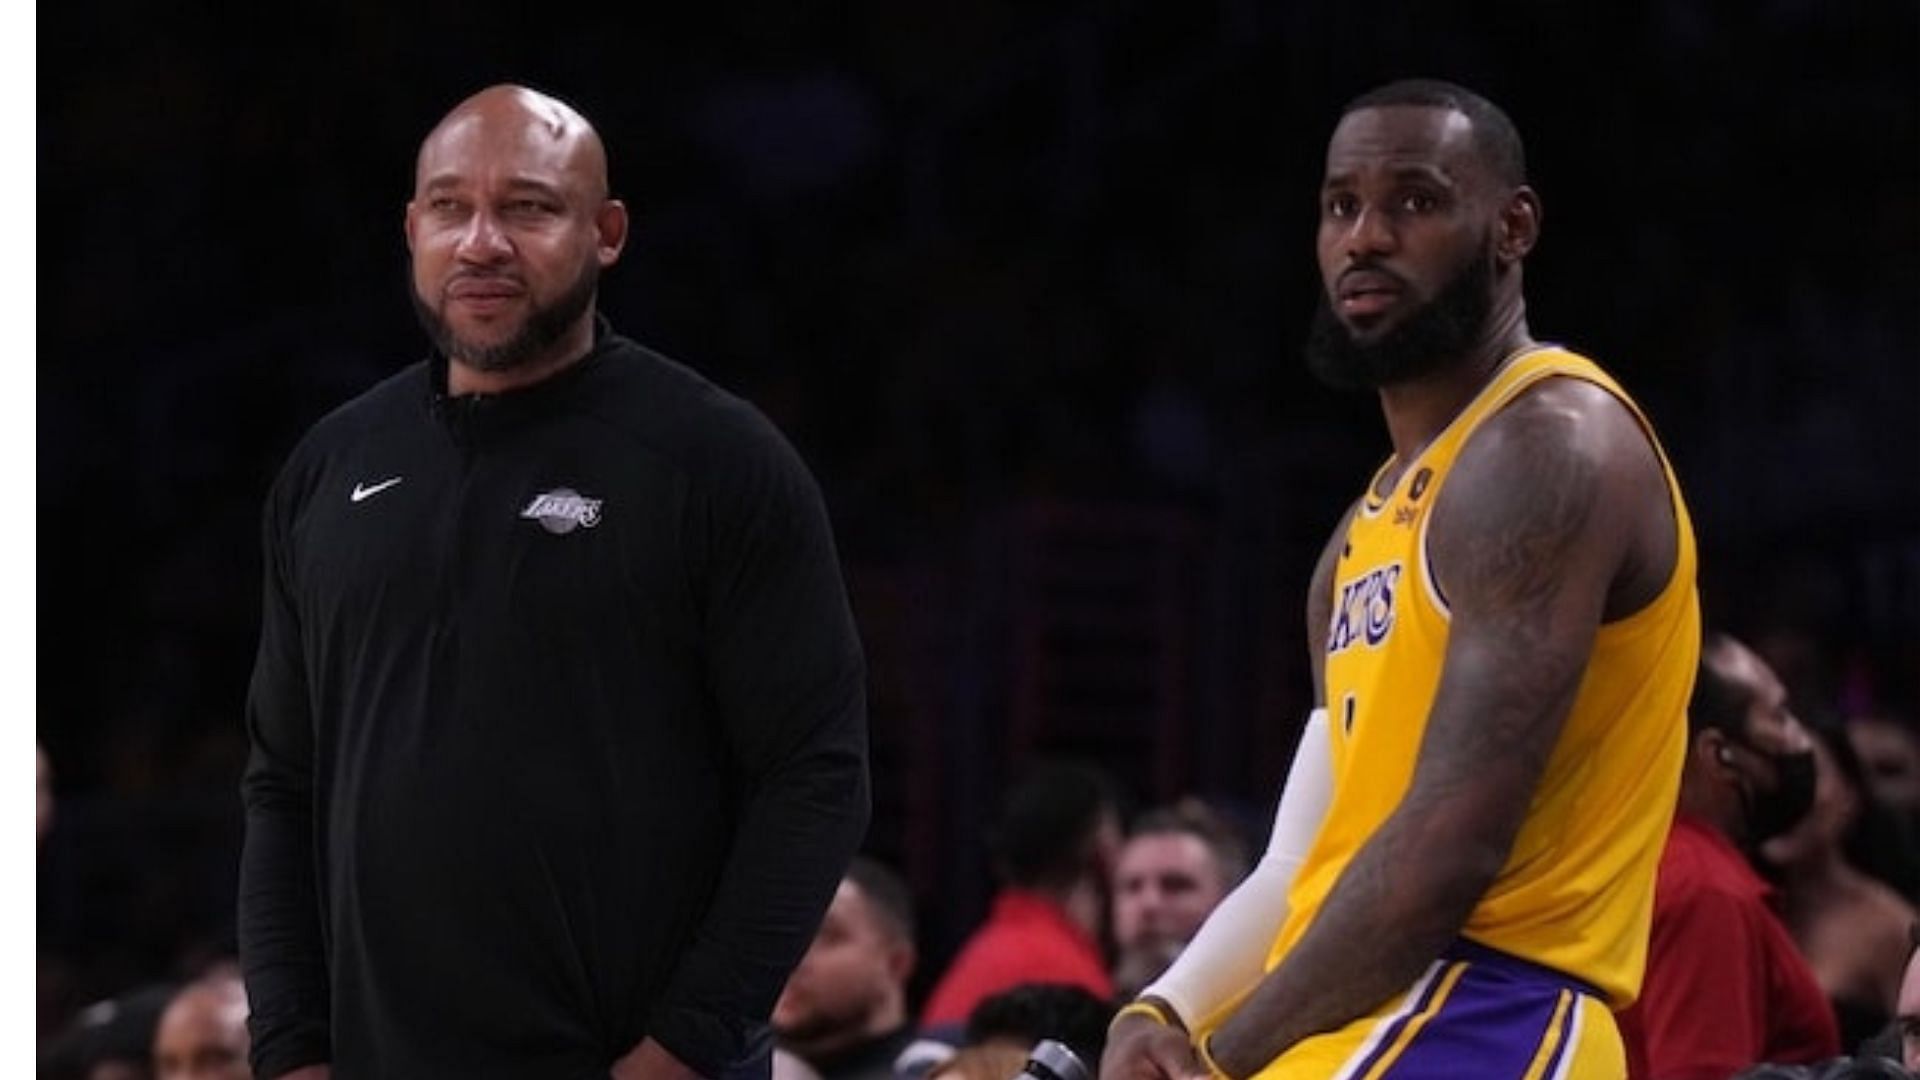 LeBron James and Darvin Ham look on at a game [Source: Lakers Nation]